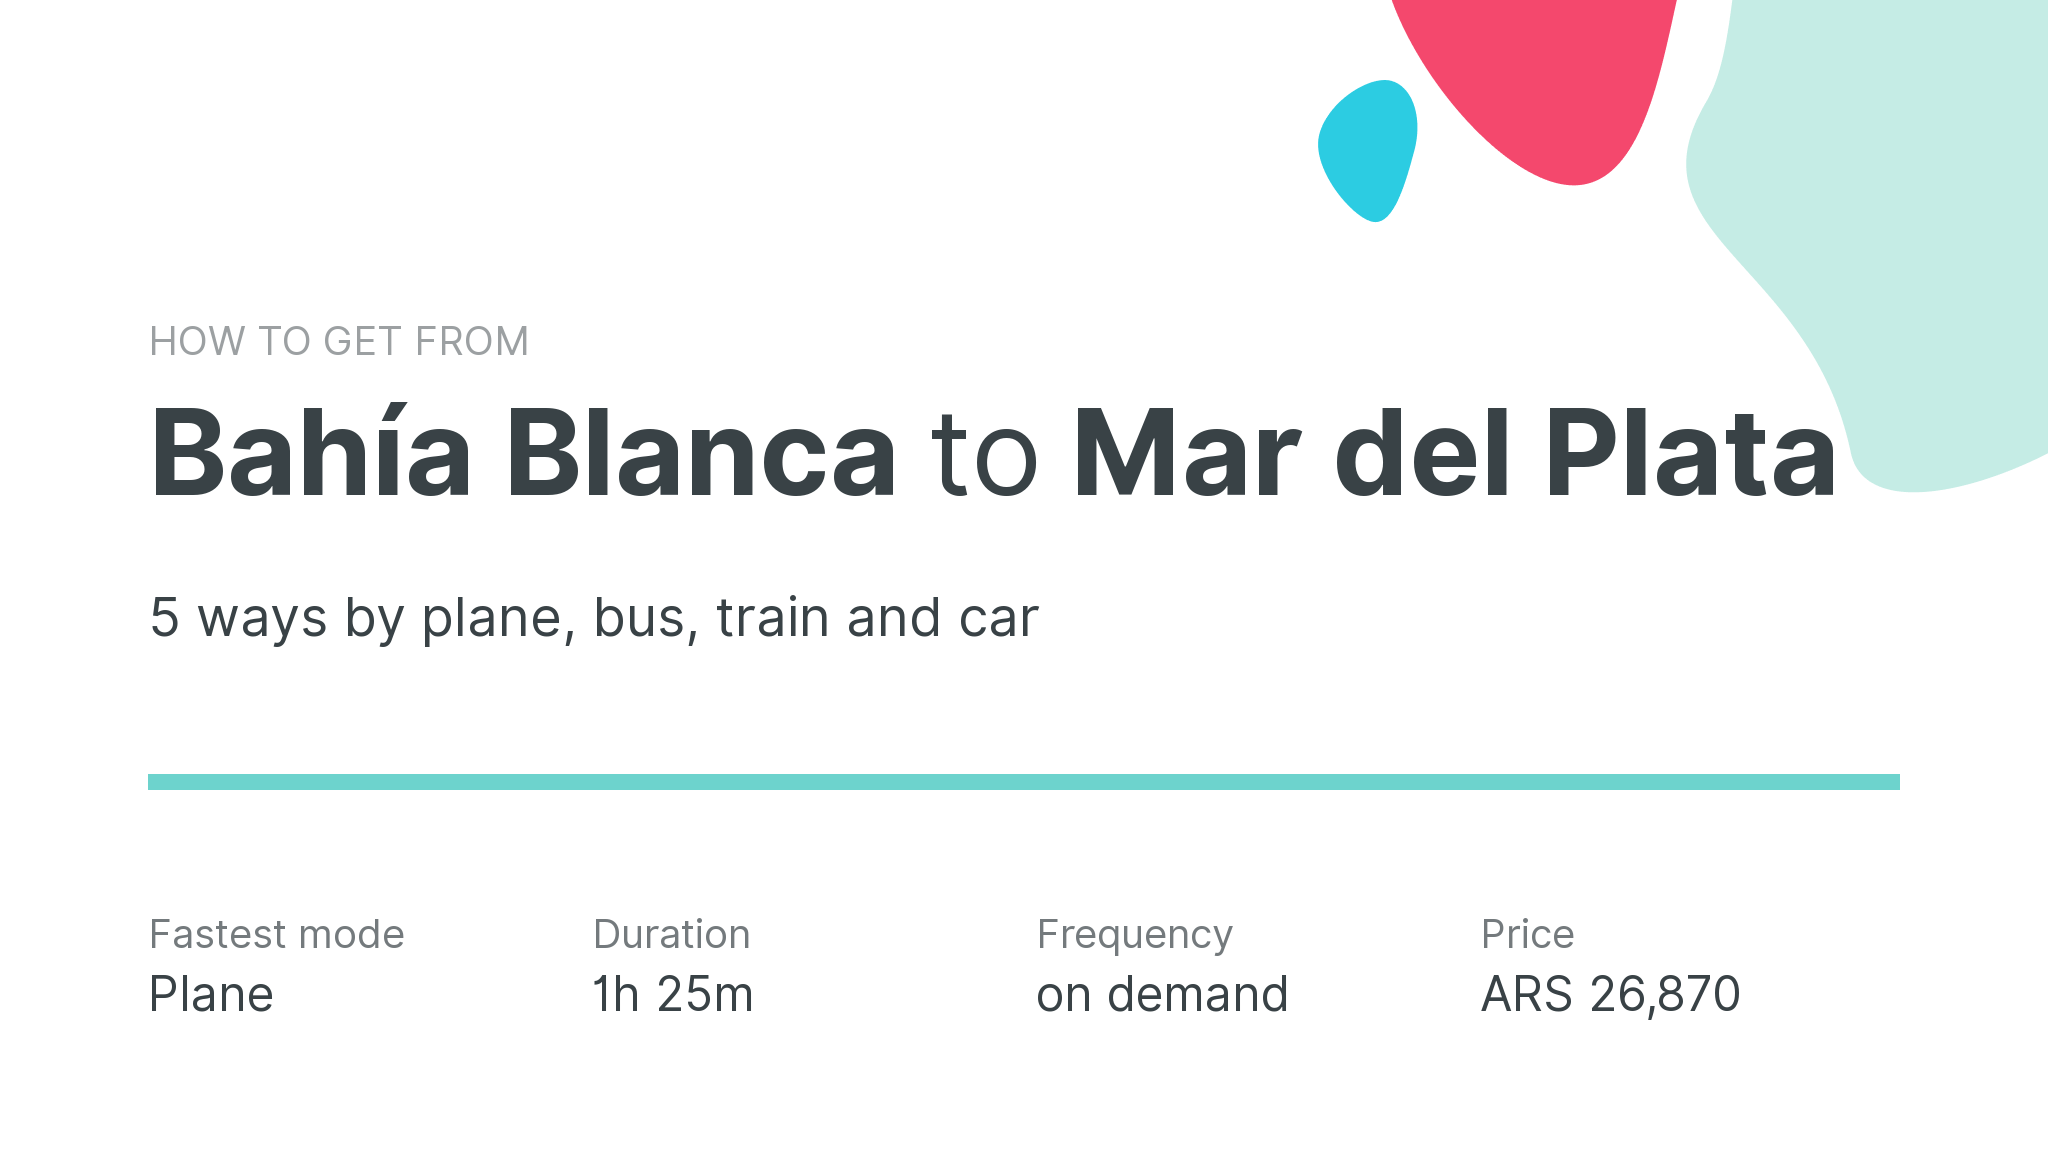 How do I get from Bahía Blanca to Mar del Plata